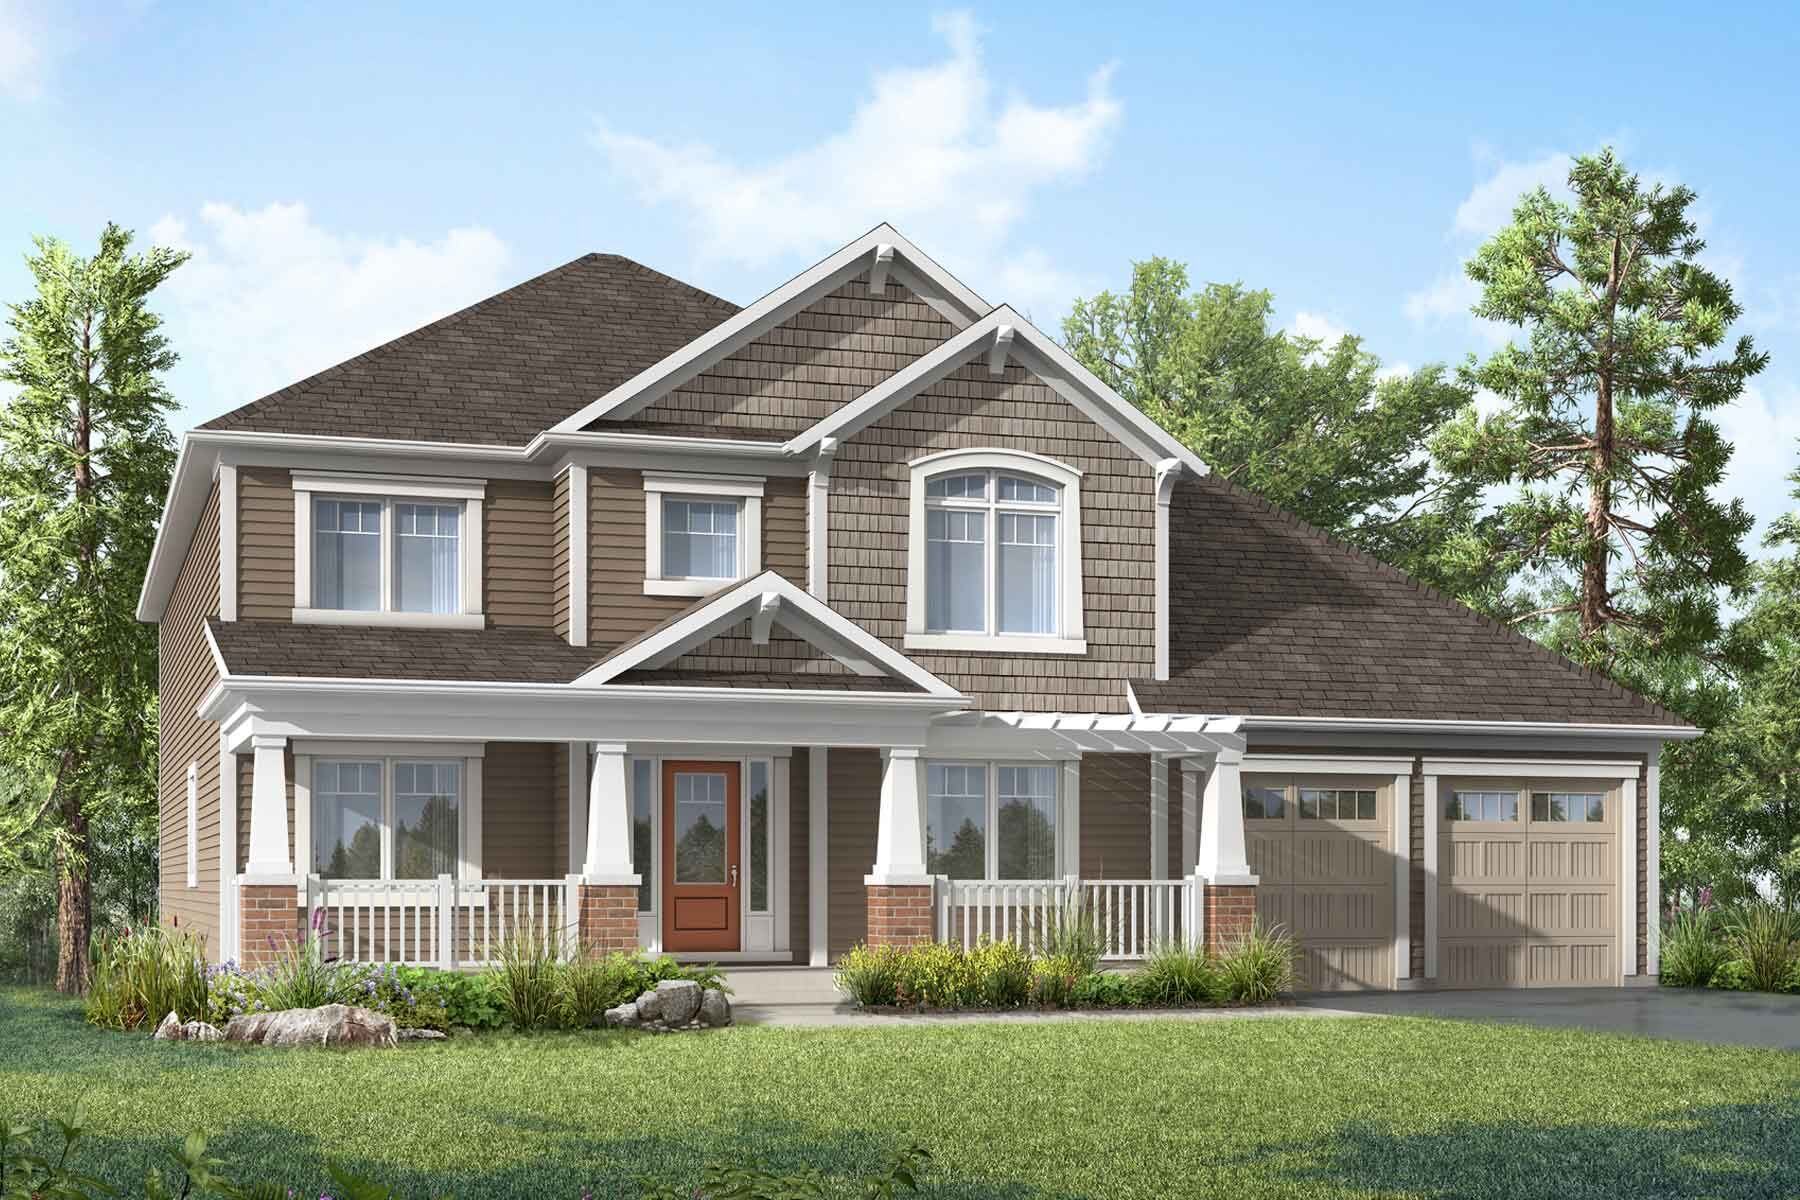 A Craftsman style elevation with double car garage and a covered, long porch. 